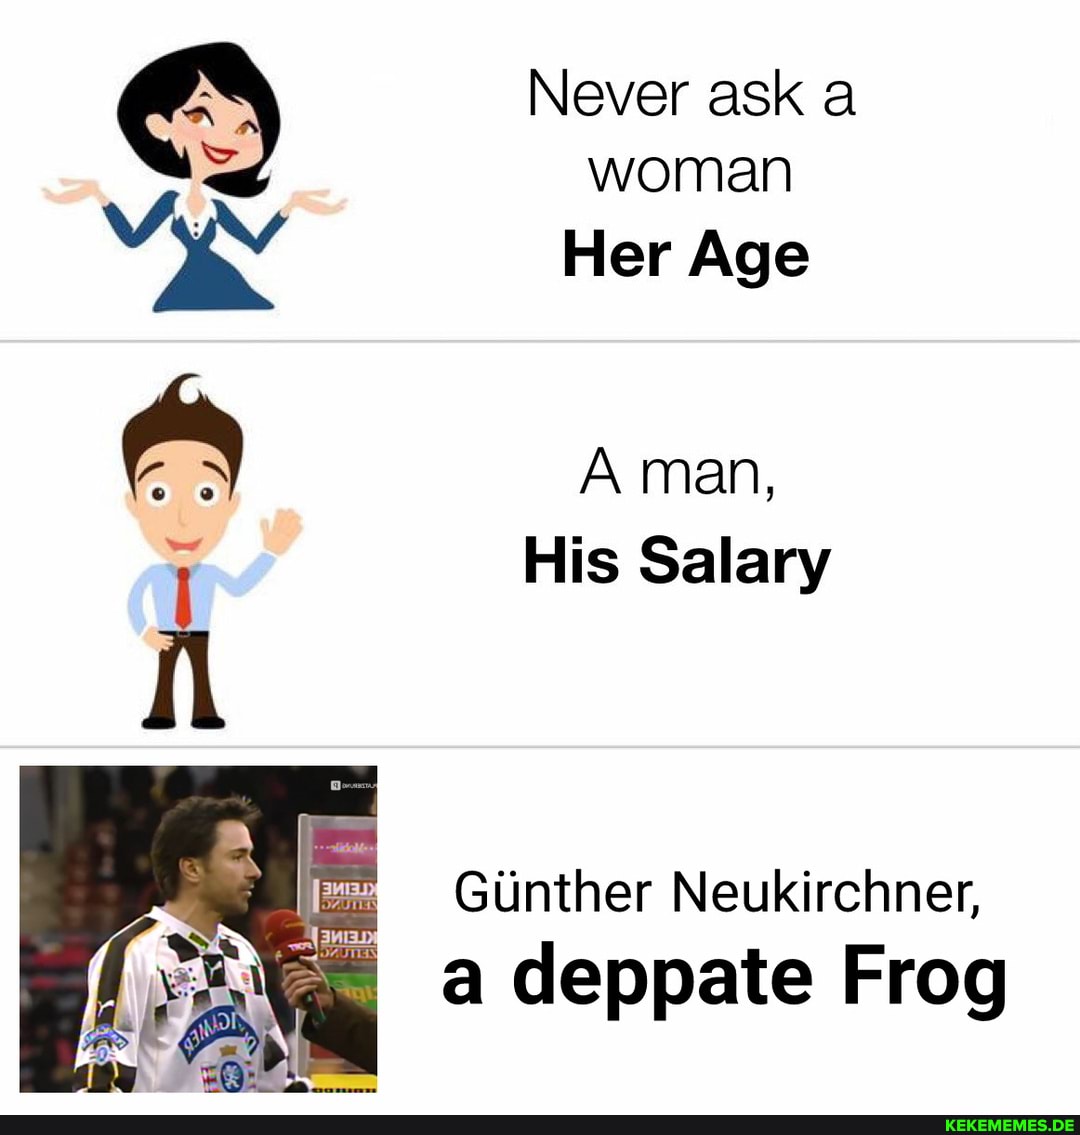 Never ask a woman Her Age A man, His Salary Gunther Neukirchner, a deppate Frog